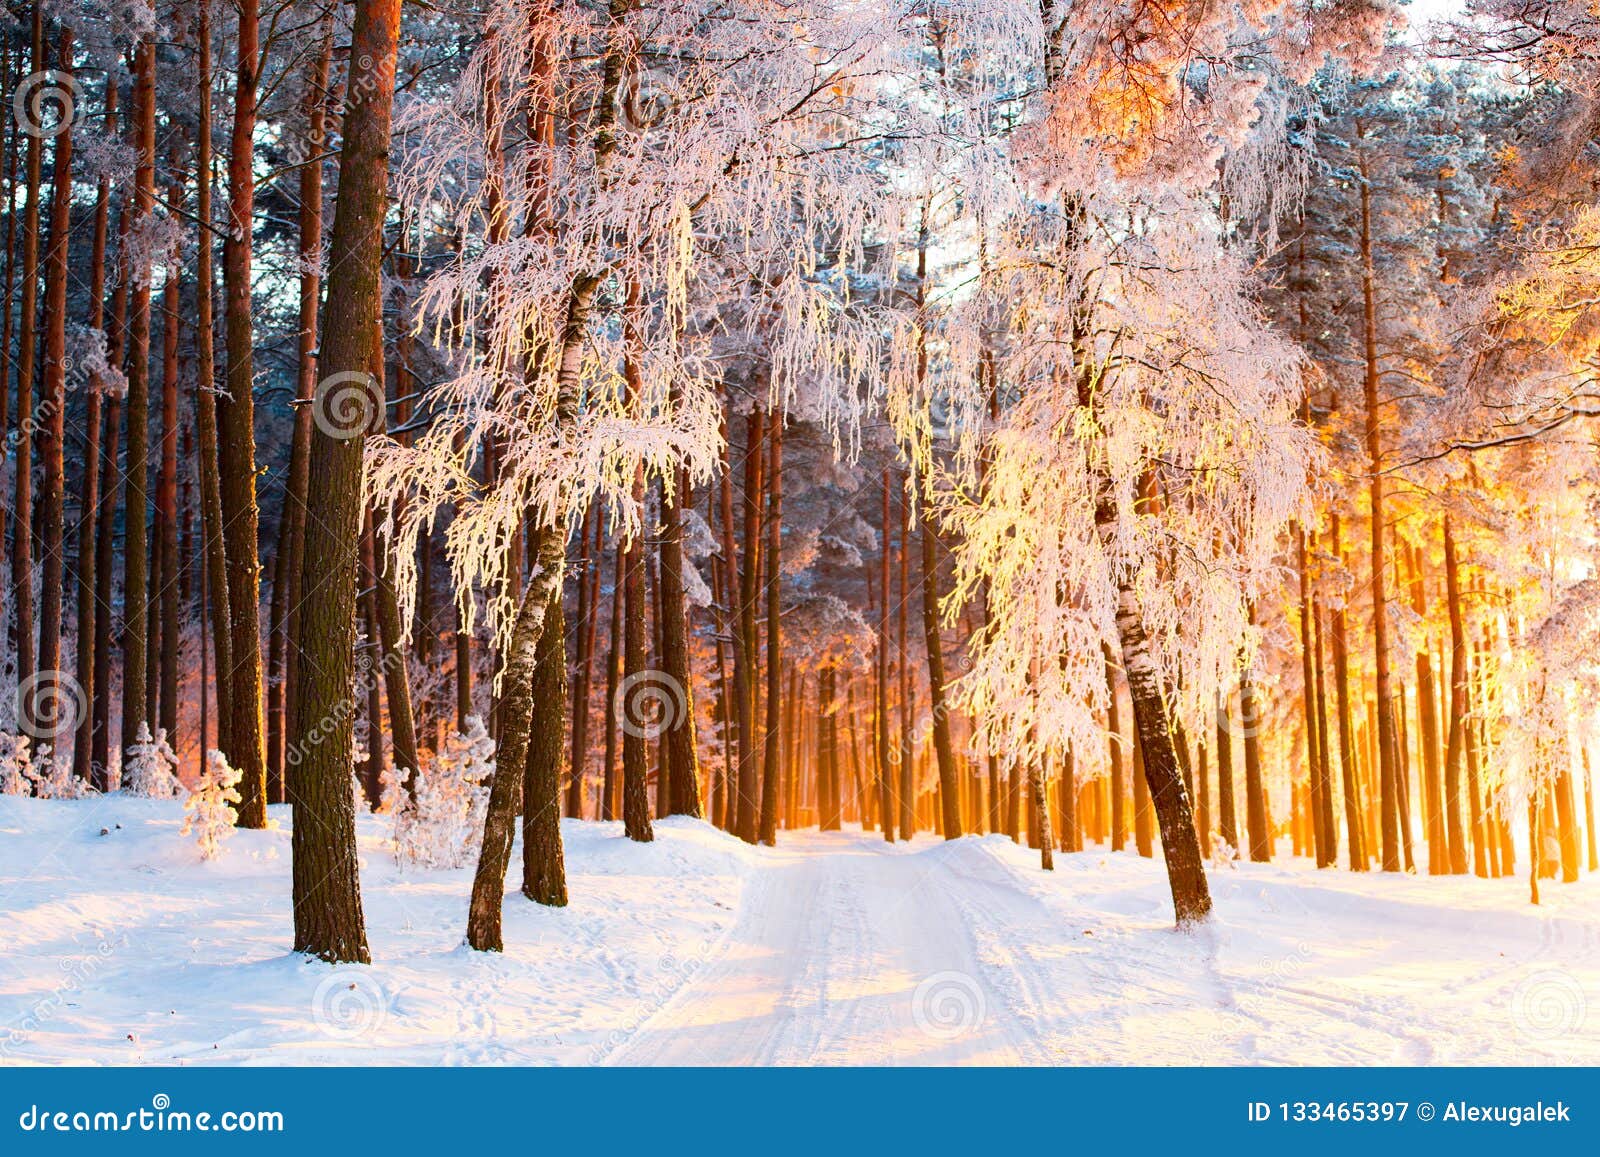 Sunny Winter Forest. Beautiful Christmas Landscape. Park with ...